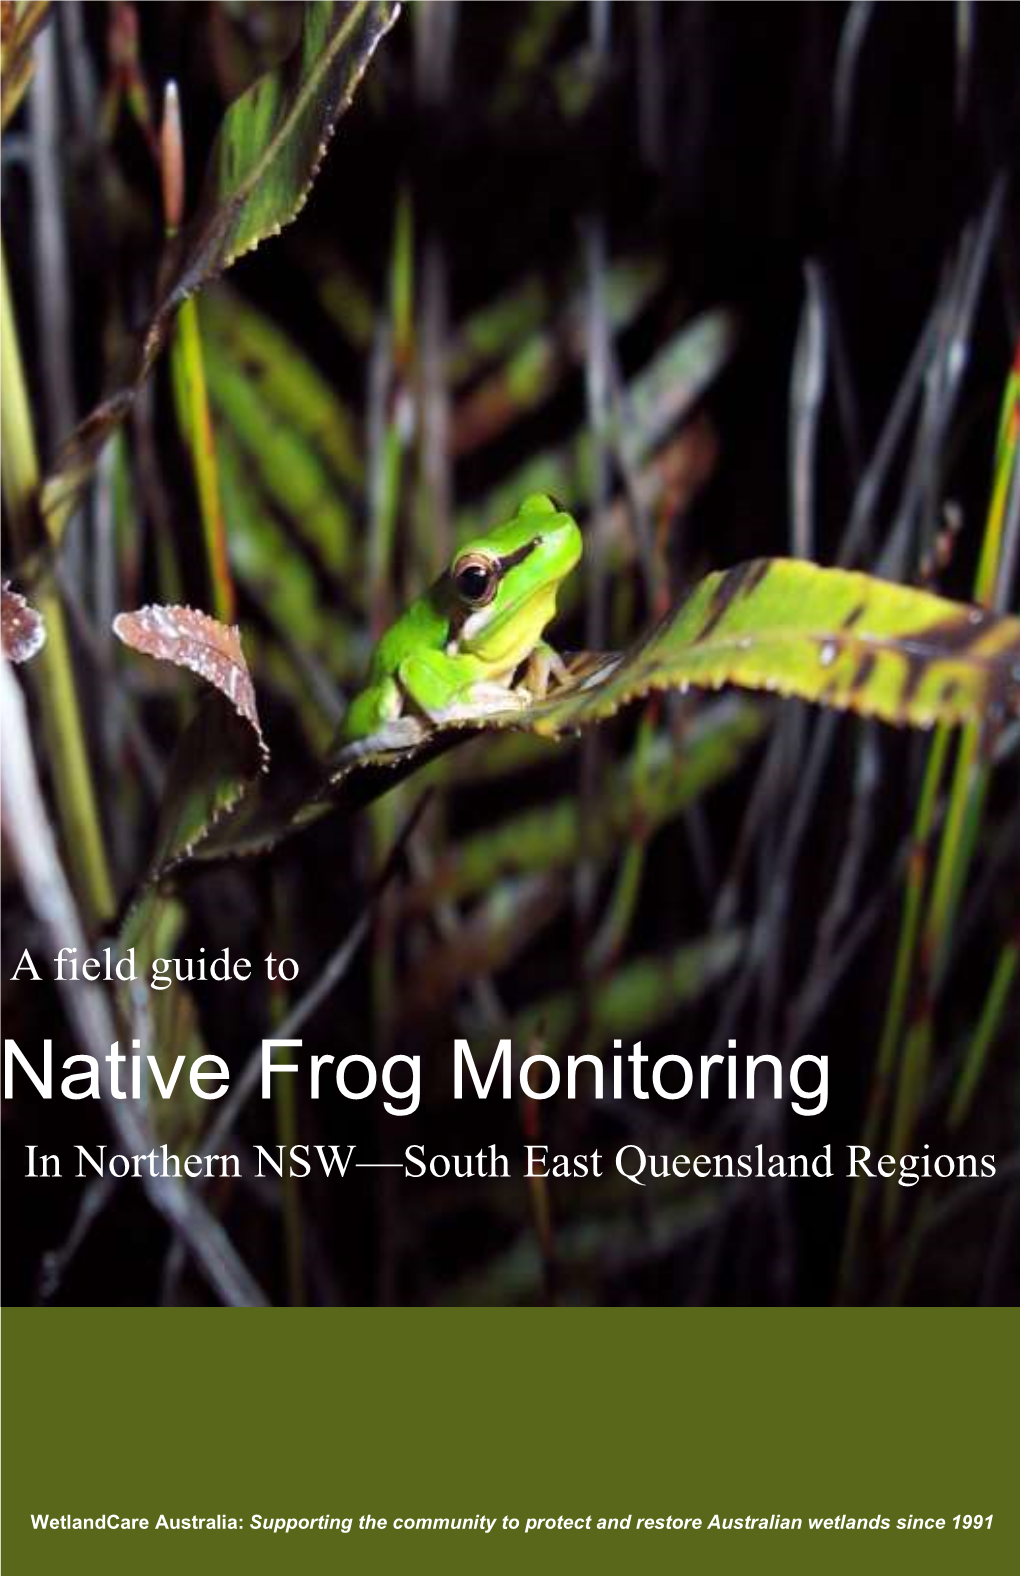 Native Frog Monitoring in Northern NSW—South East Queensland Regions